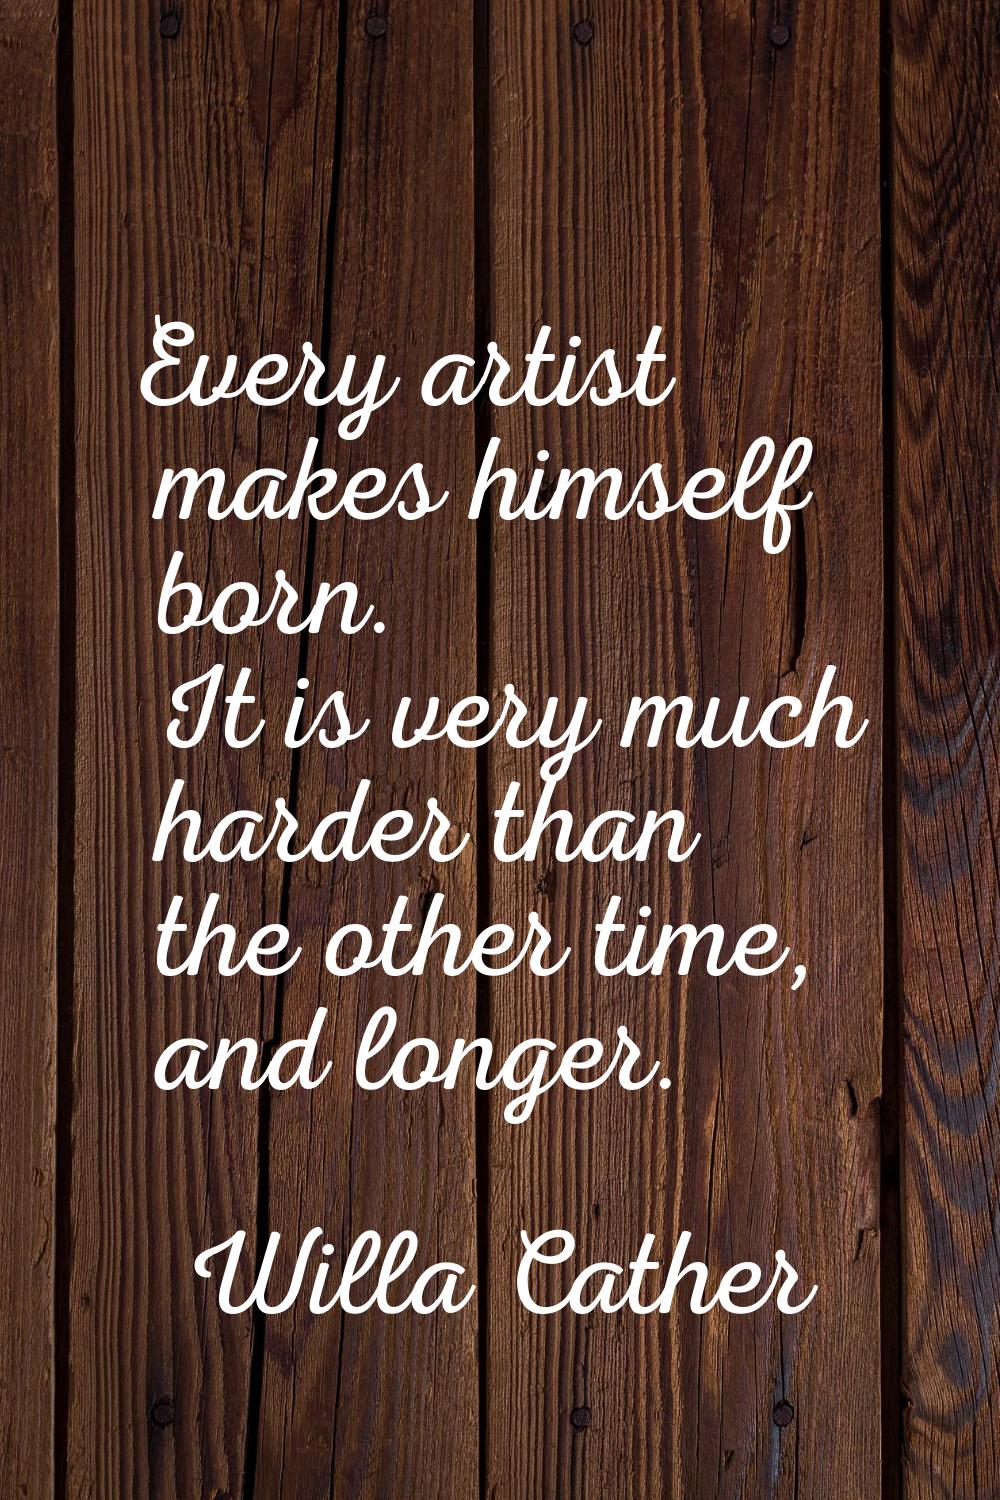 Every artist makes himself born. It is very much harder than the other time, and longer.